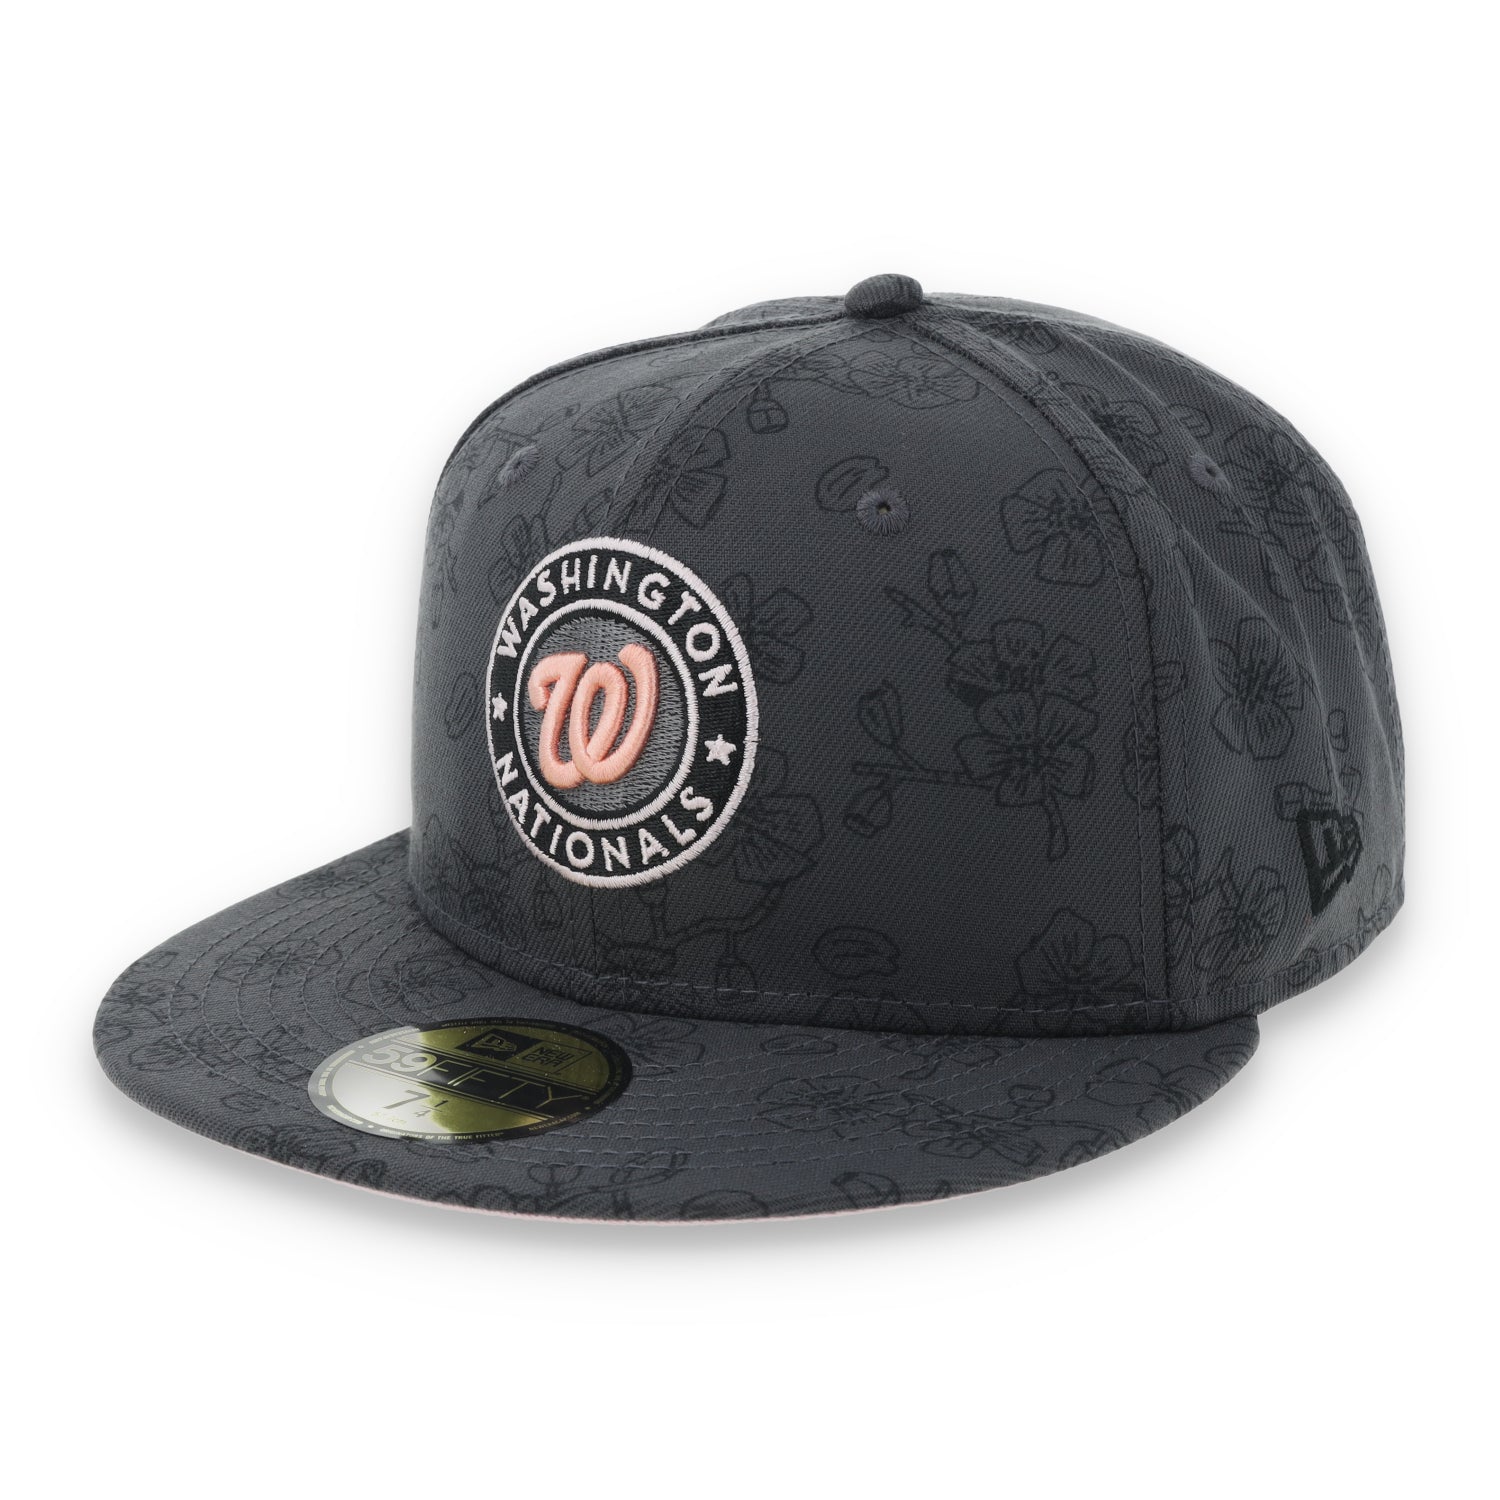 New Era Washington Nationals City Connect 59FIFTY Fitted Hat